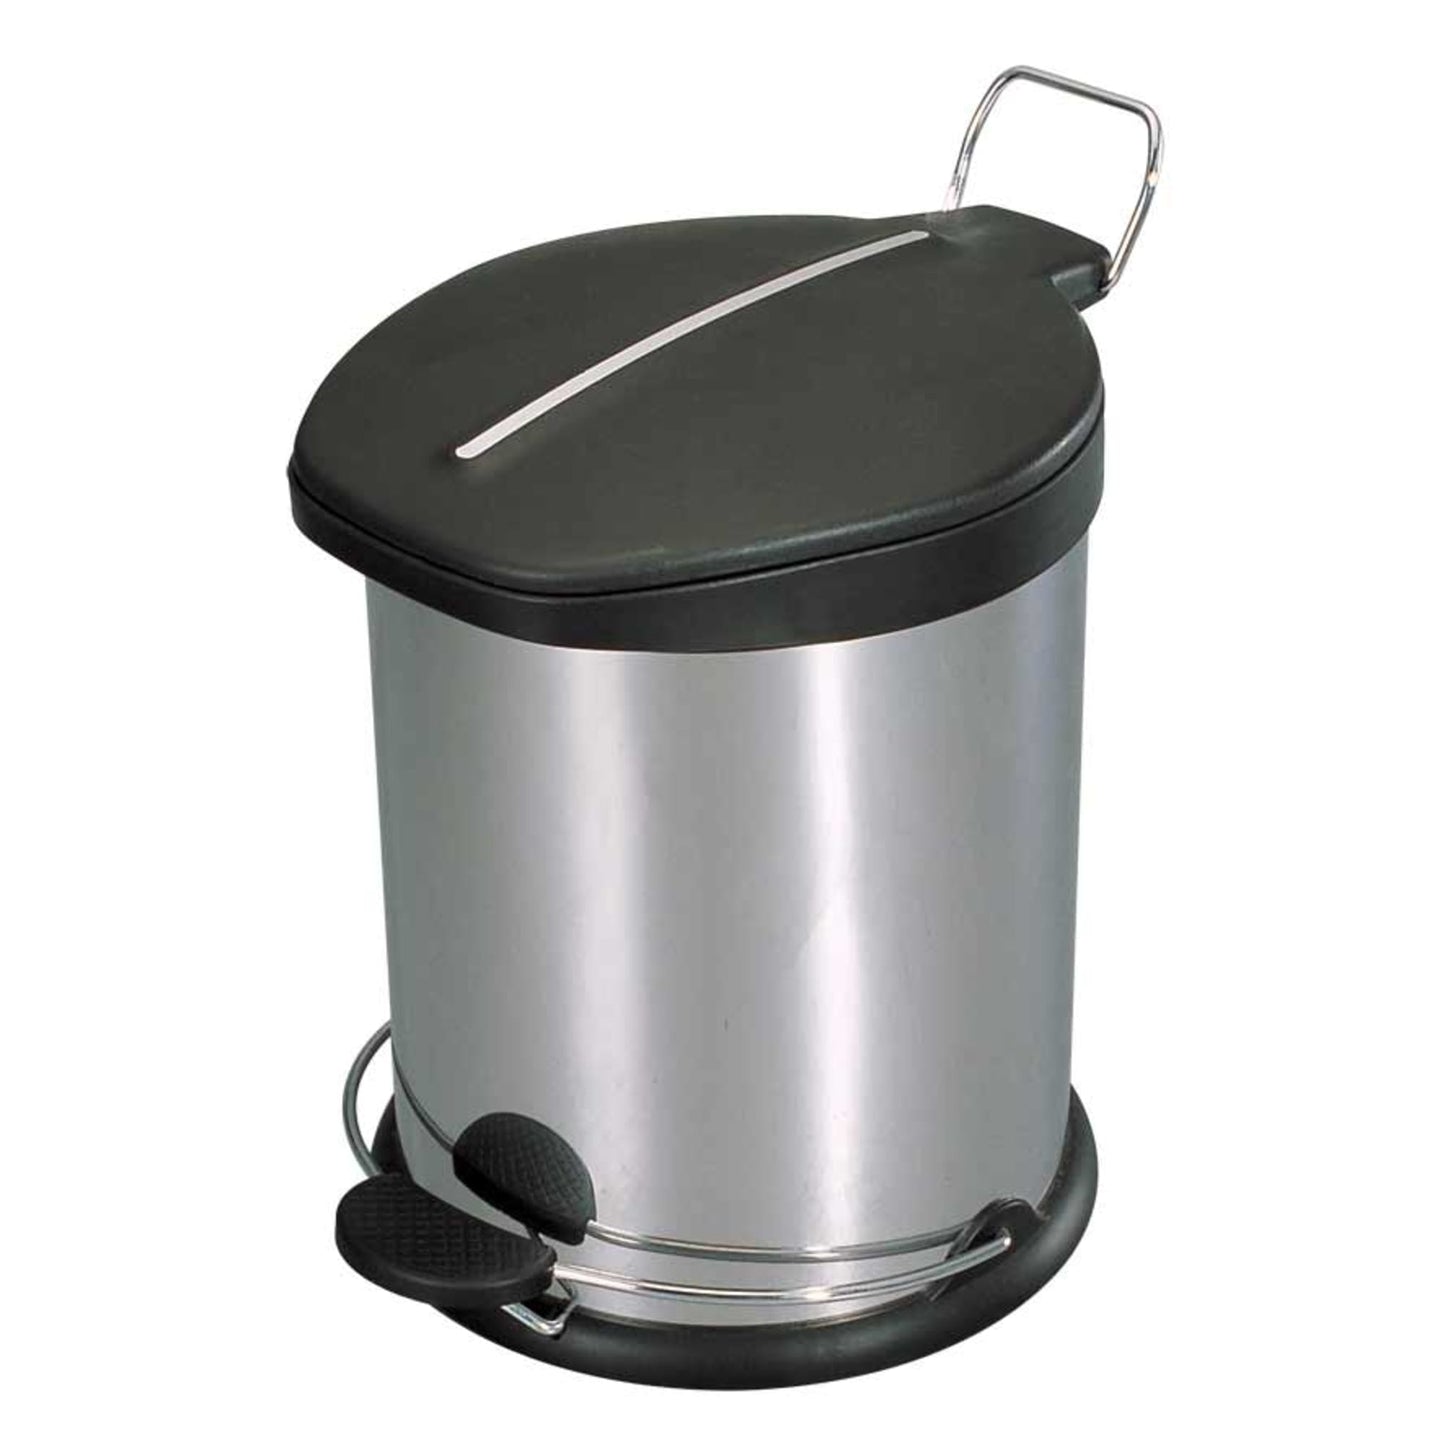 20 Liter Brushed Stainless Steel  with Plastic Top Waste Bin, Silver